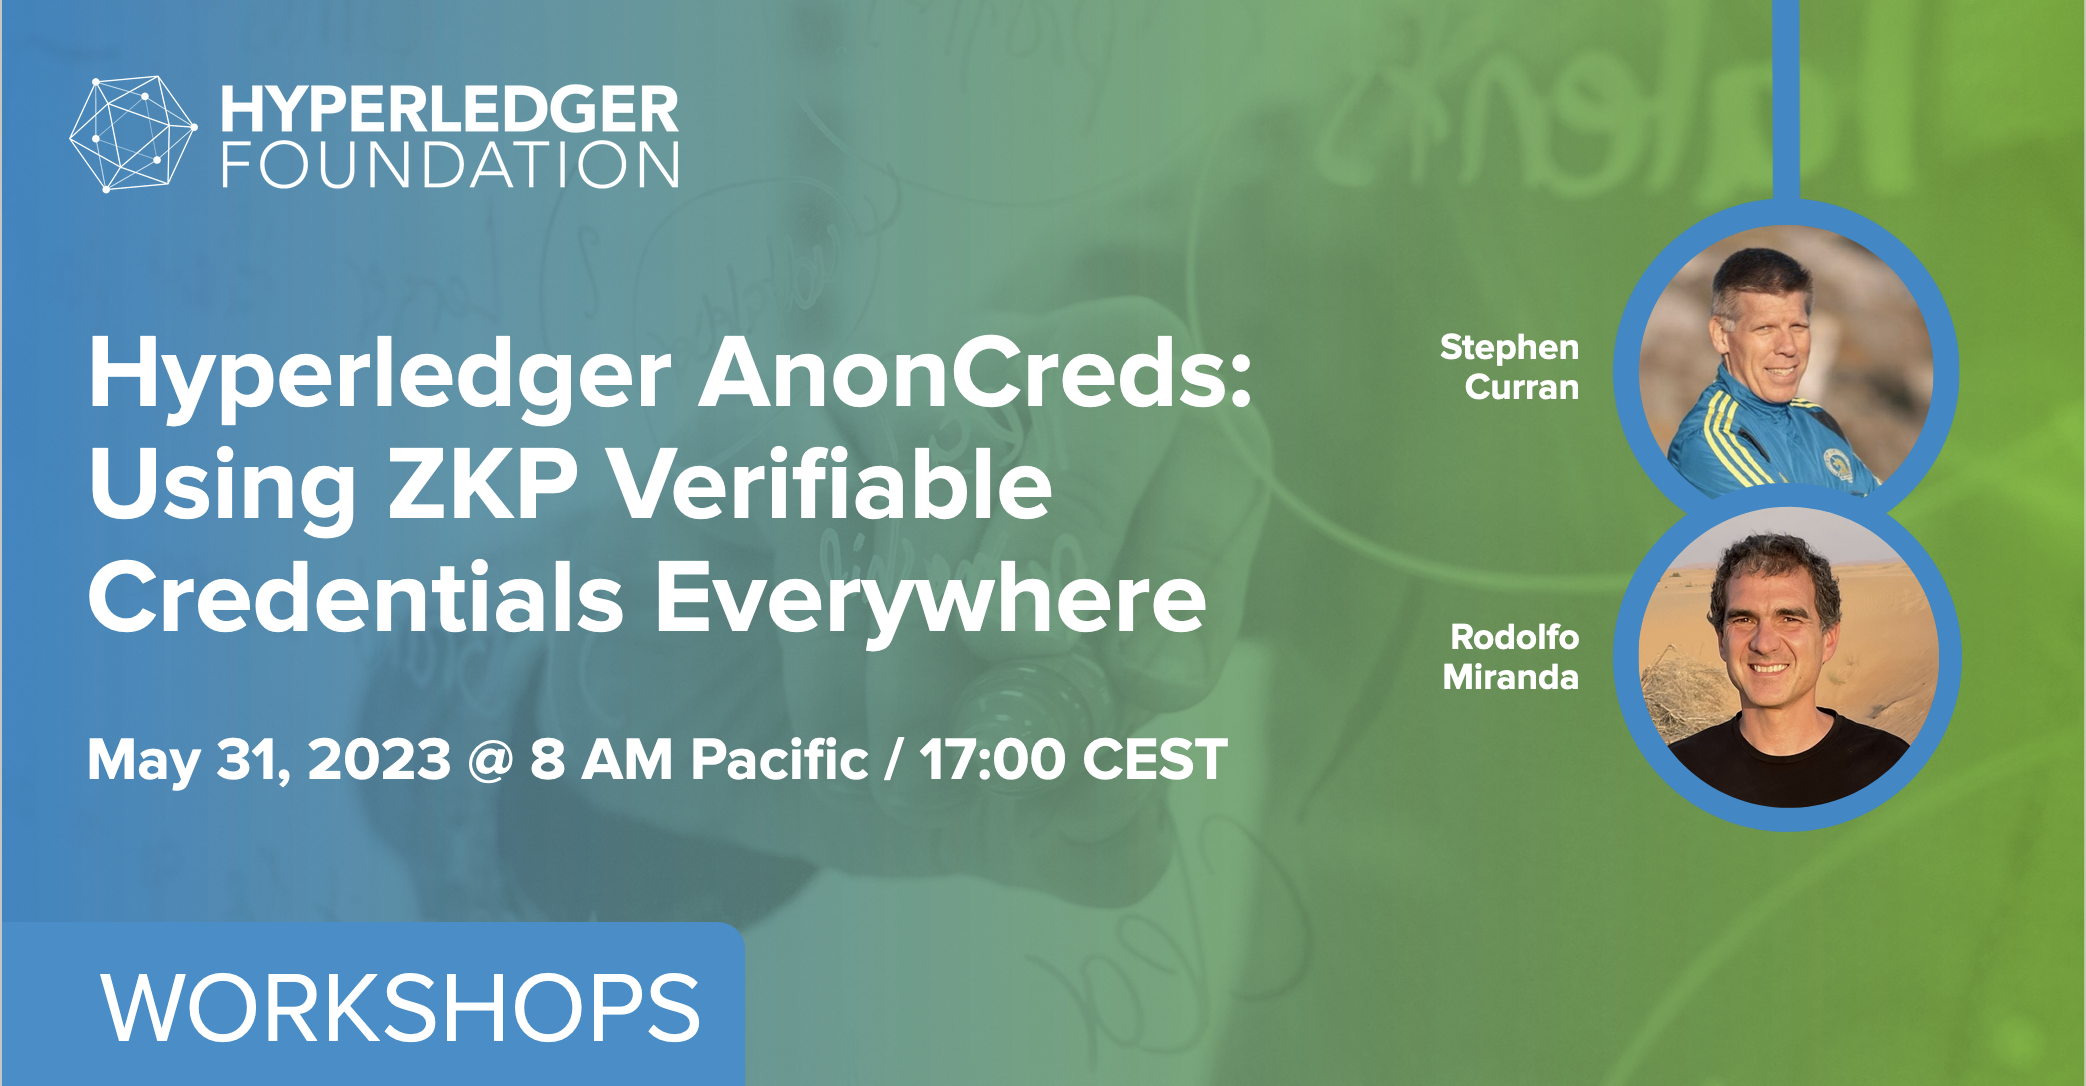 Hyperledger AnonCreds: Using ZKP Verifiable Credentials Everywhere featured image